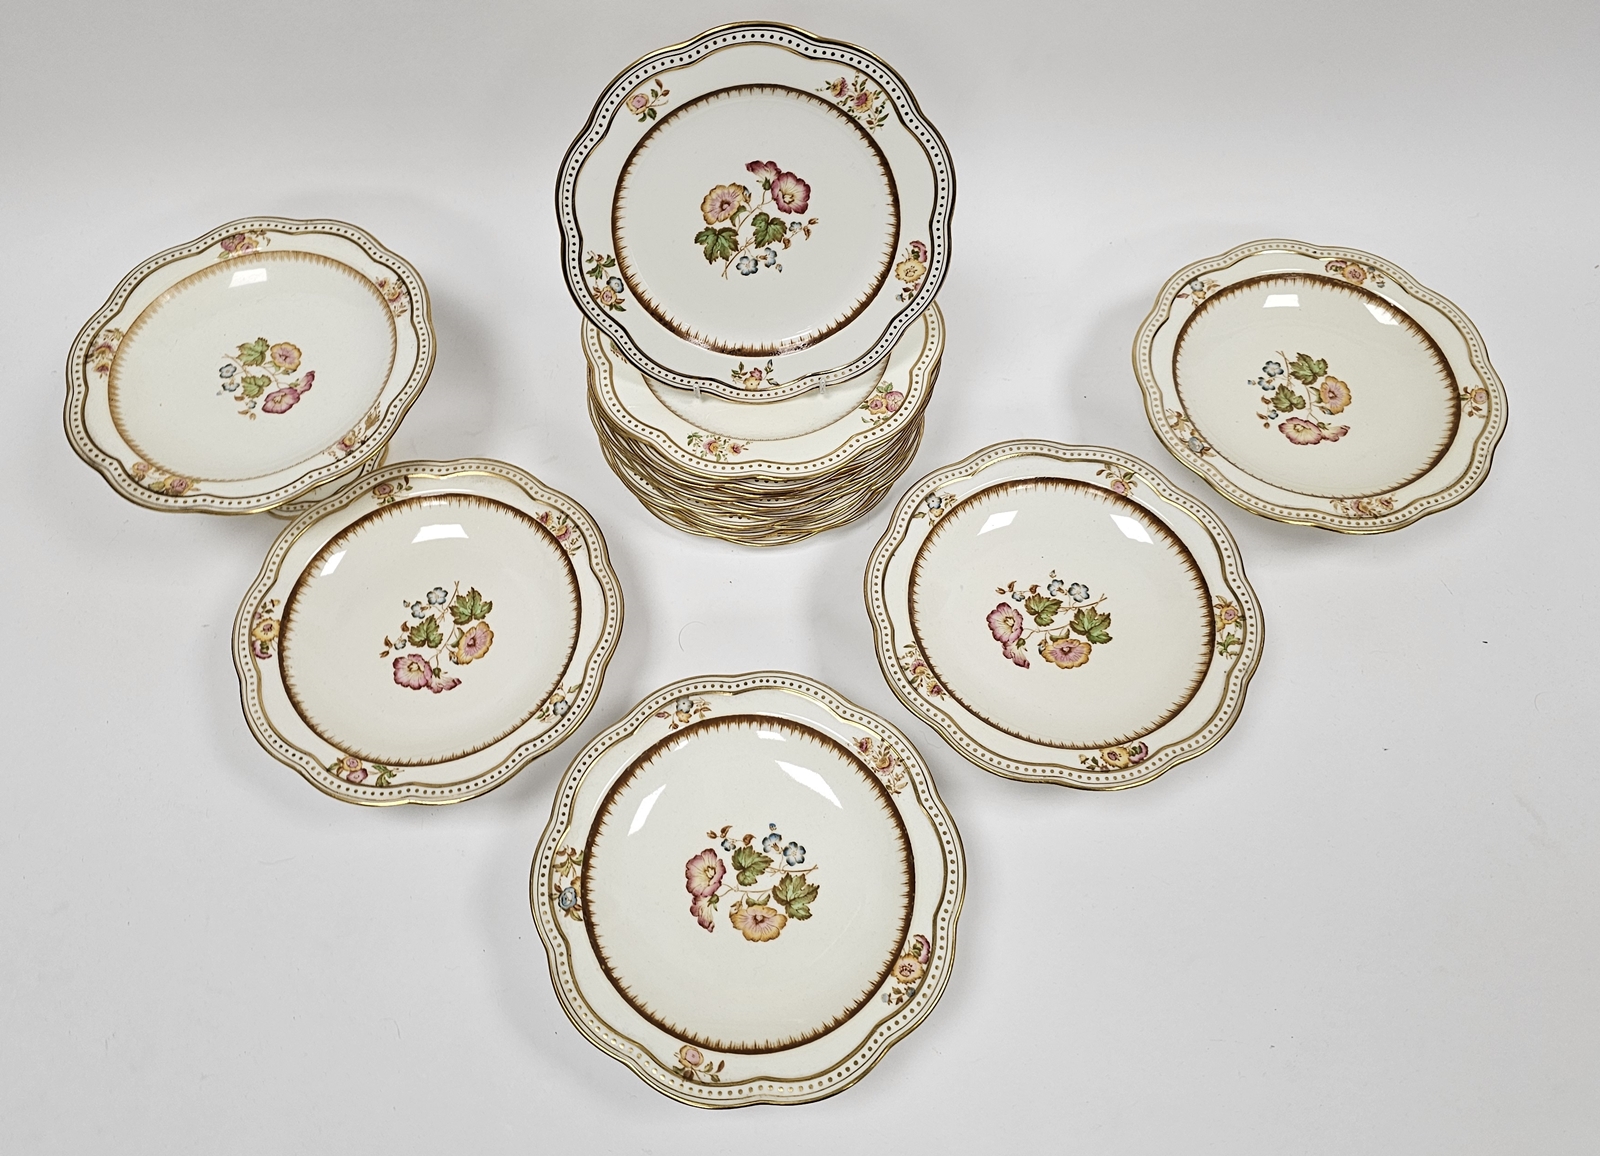 Wedgwood bone china part dessert service, late 19th century, printed black and impressed marks, - Image 2 of 6